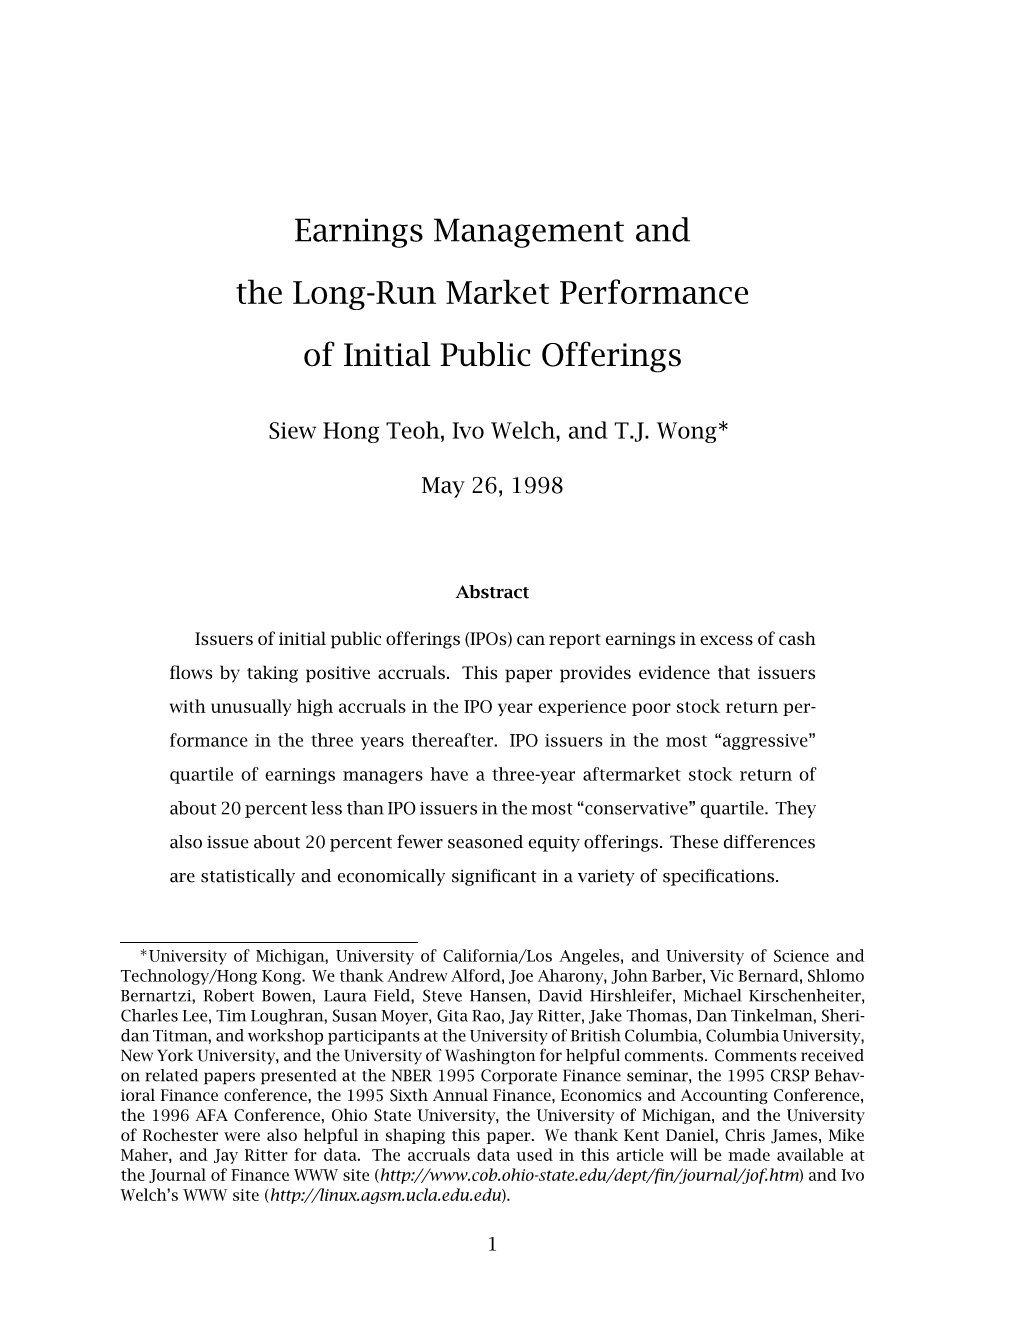 Earnings Management and the Long-Run Market Performance of Initial Public Offerings